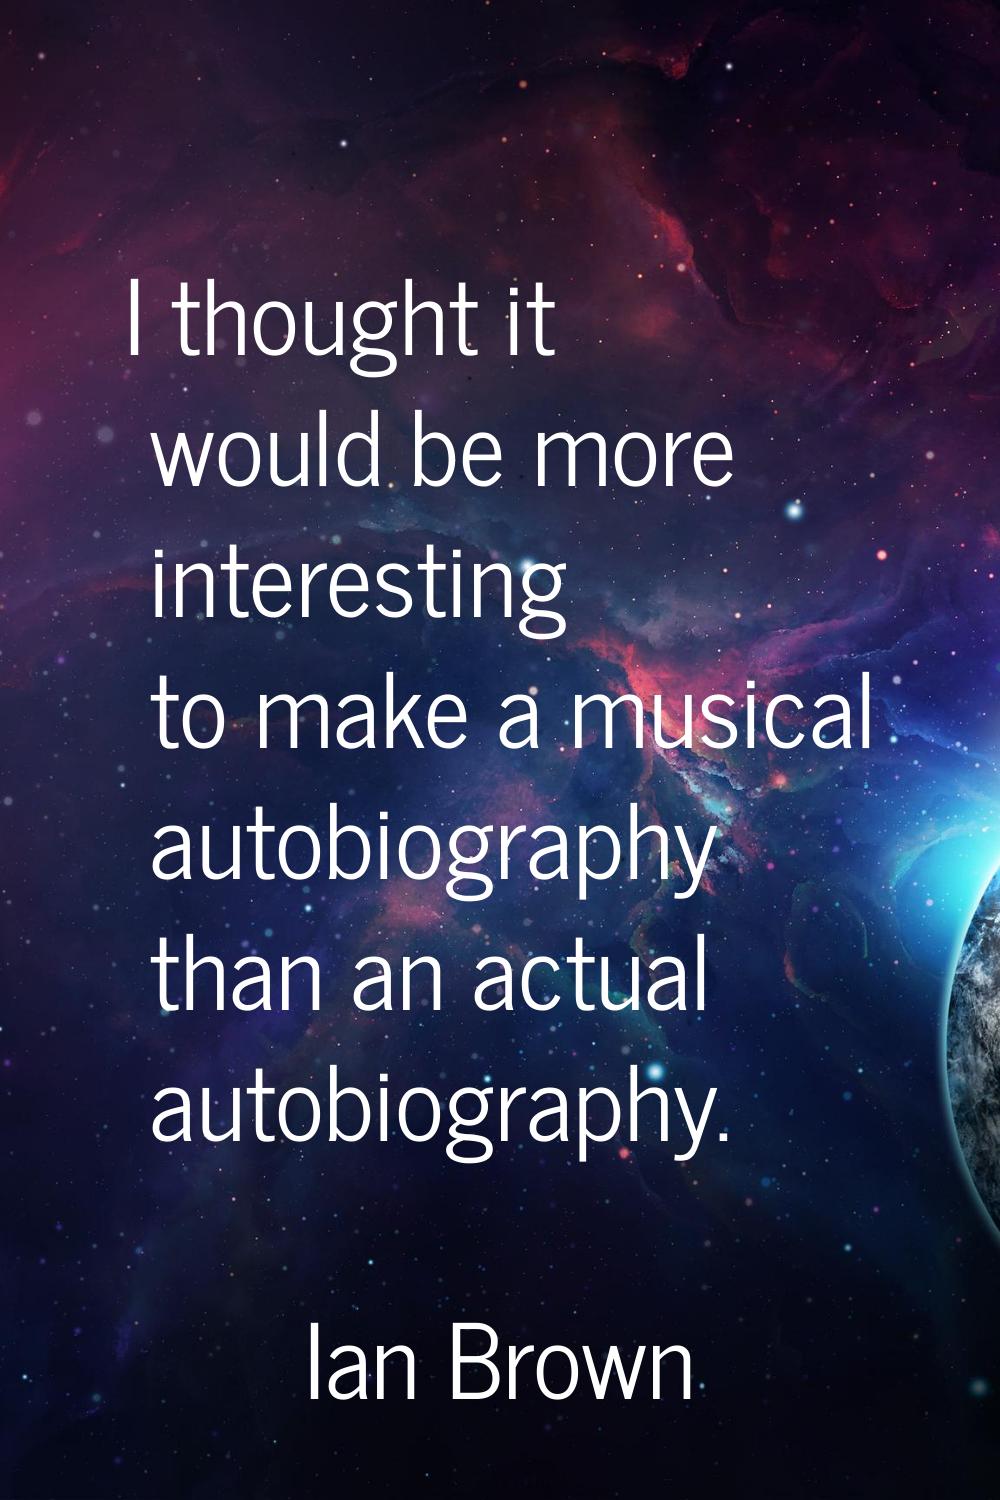 I thought it would be more interesting to make a musical autobiography than an actual autobiography